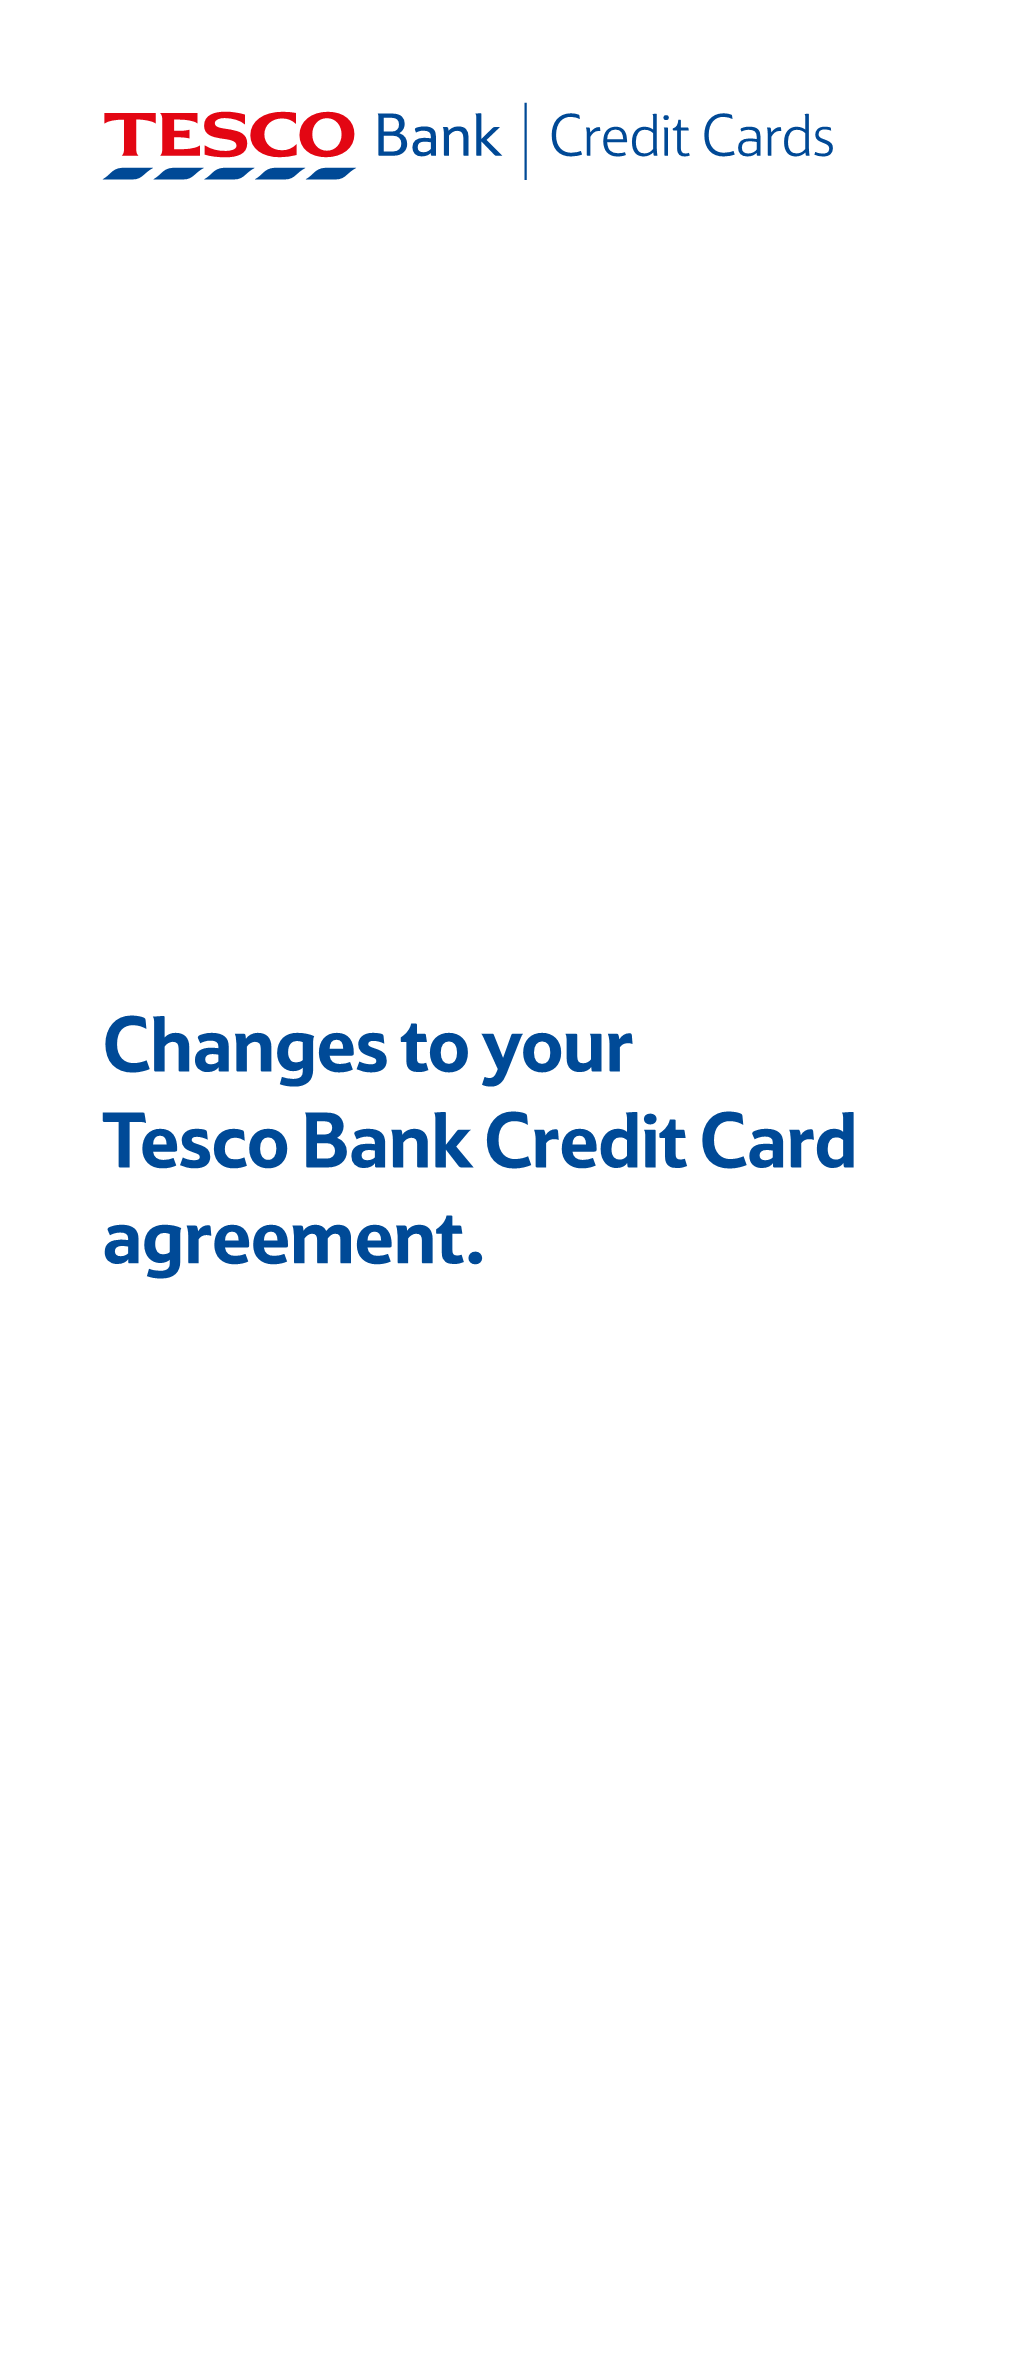 Changes to Your Tesco Bank Credit Card Agreement. Dear Customer 3